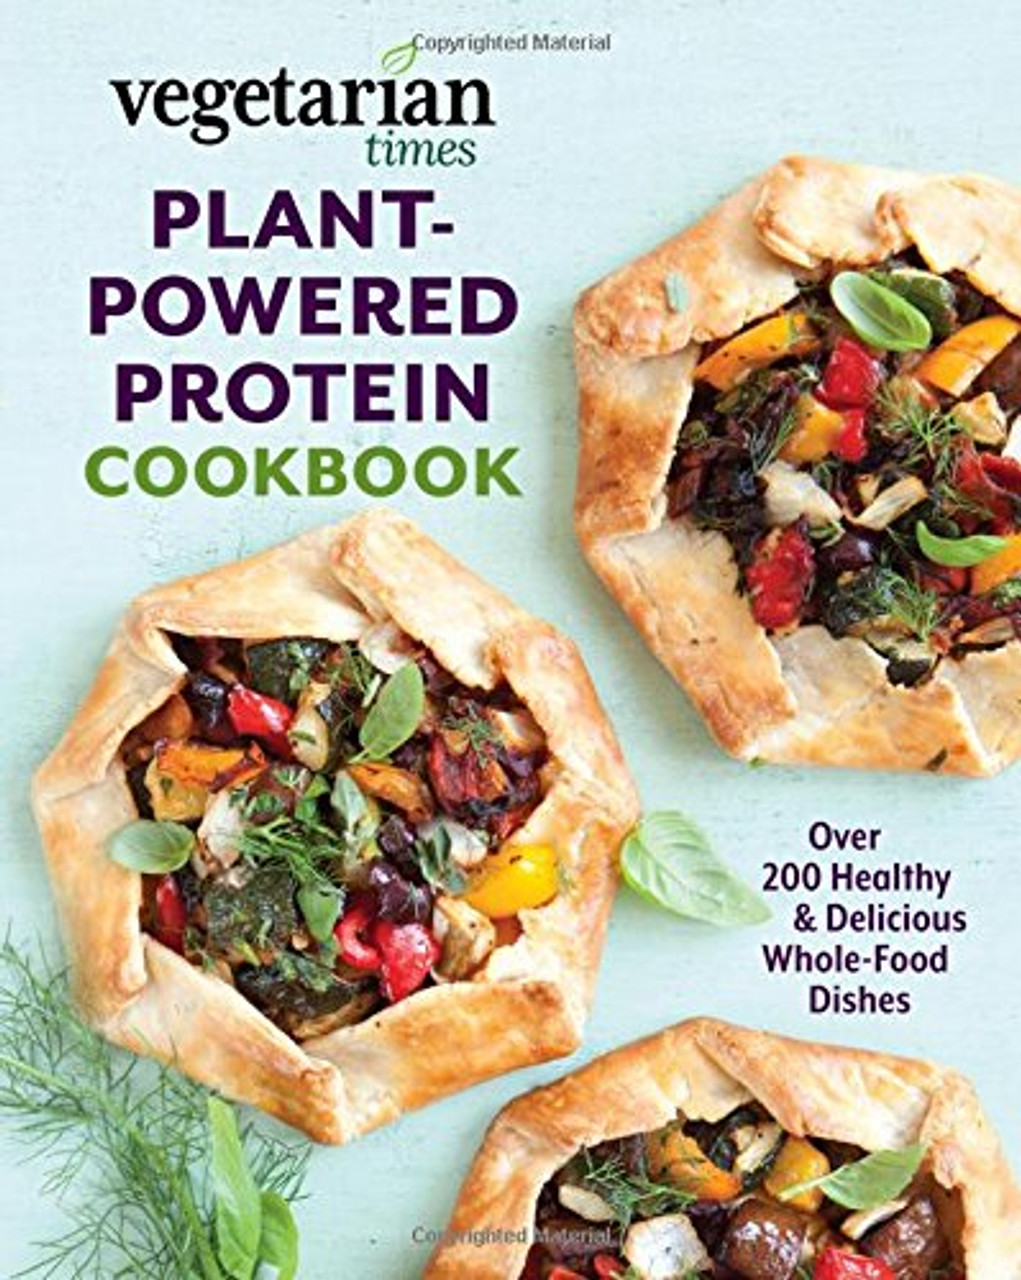 Vegetables: The Ultimate Cookbook Featuring 300+ Delicious Plant-Based Recipes [Book]